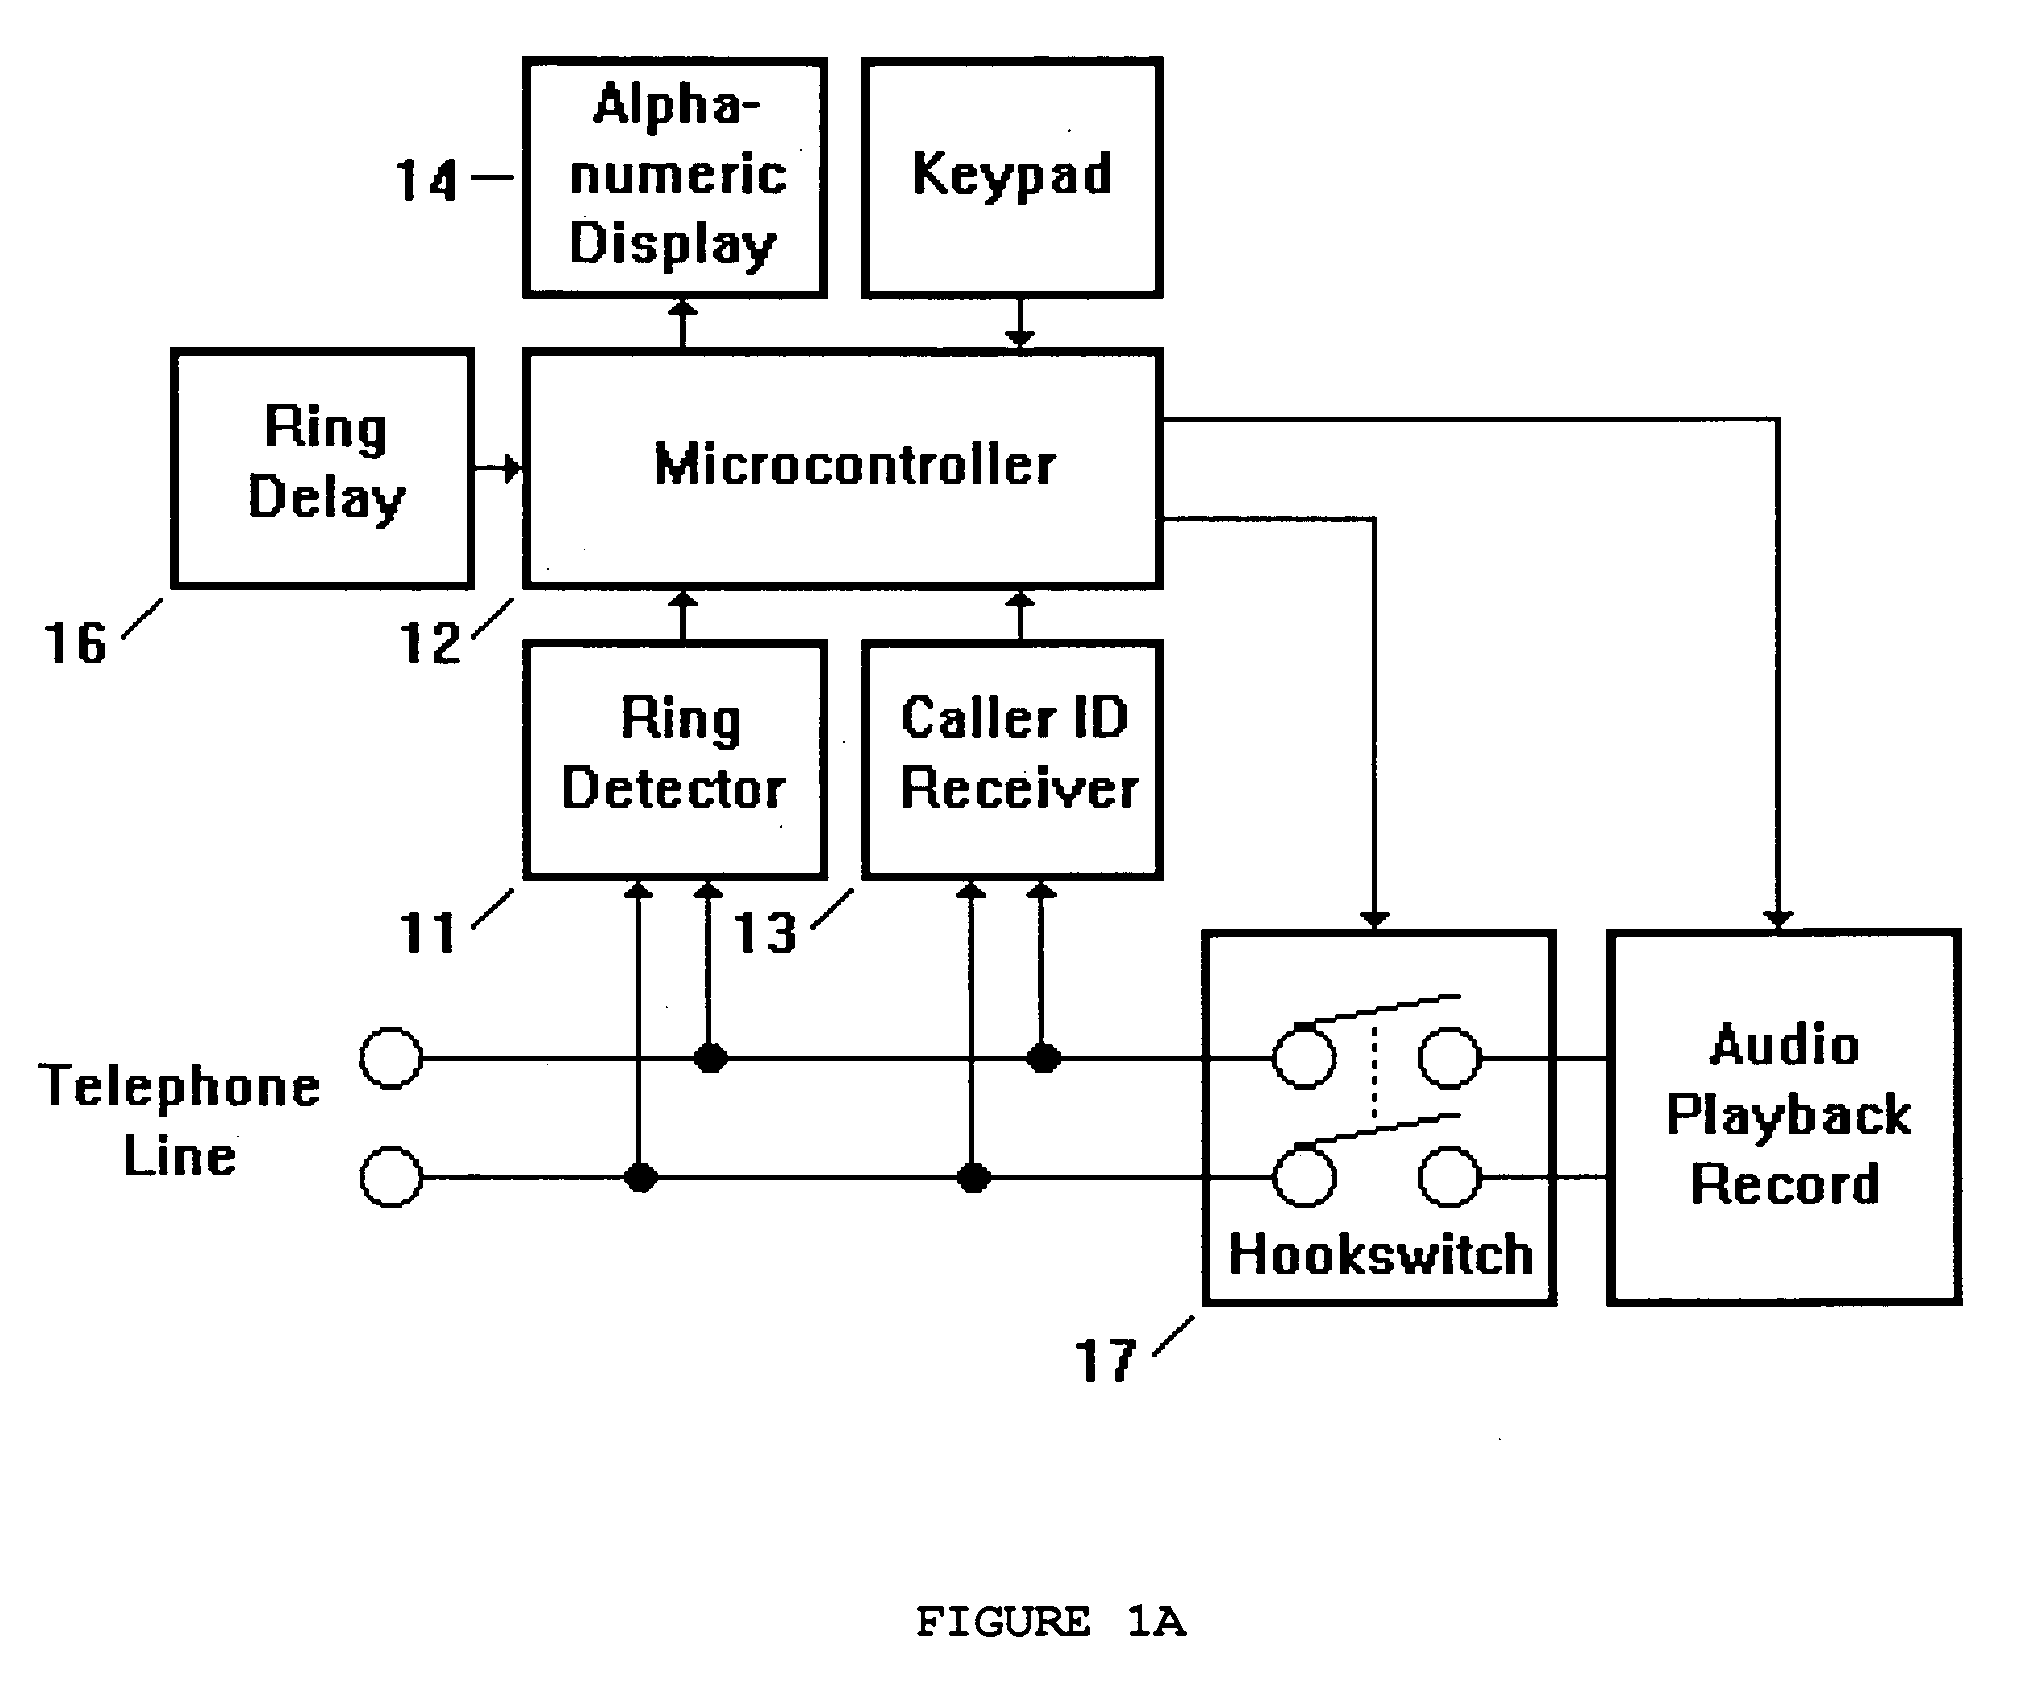 Method and apparatus for automated telephone call screening